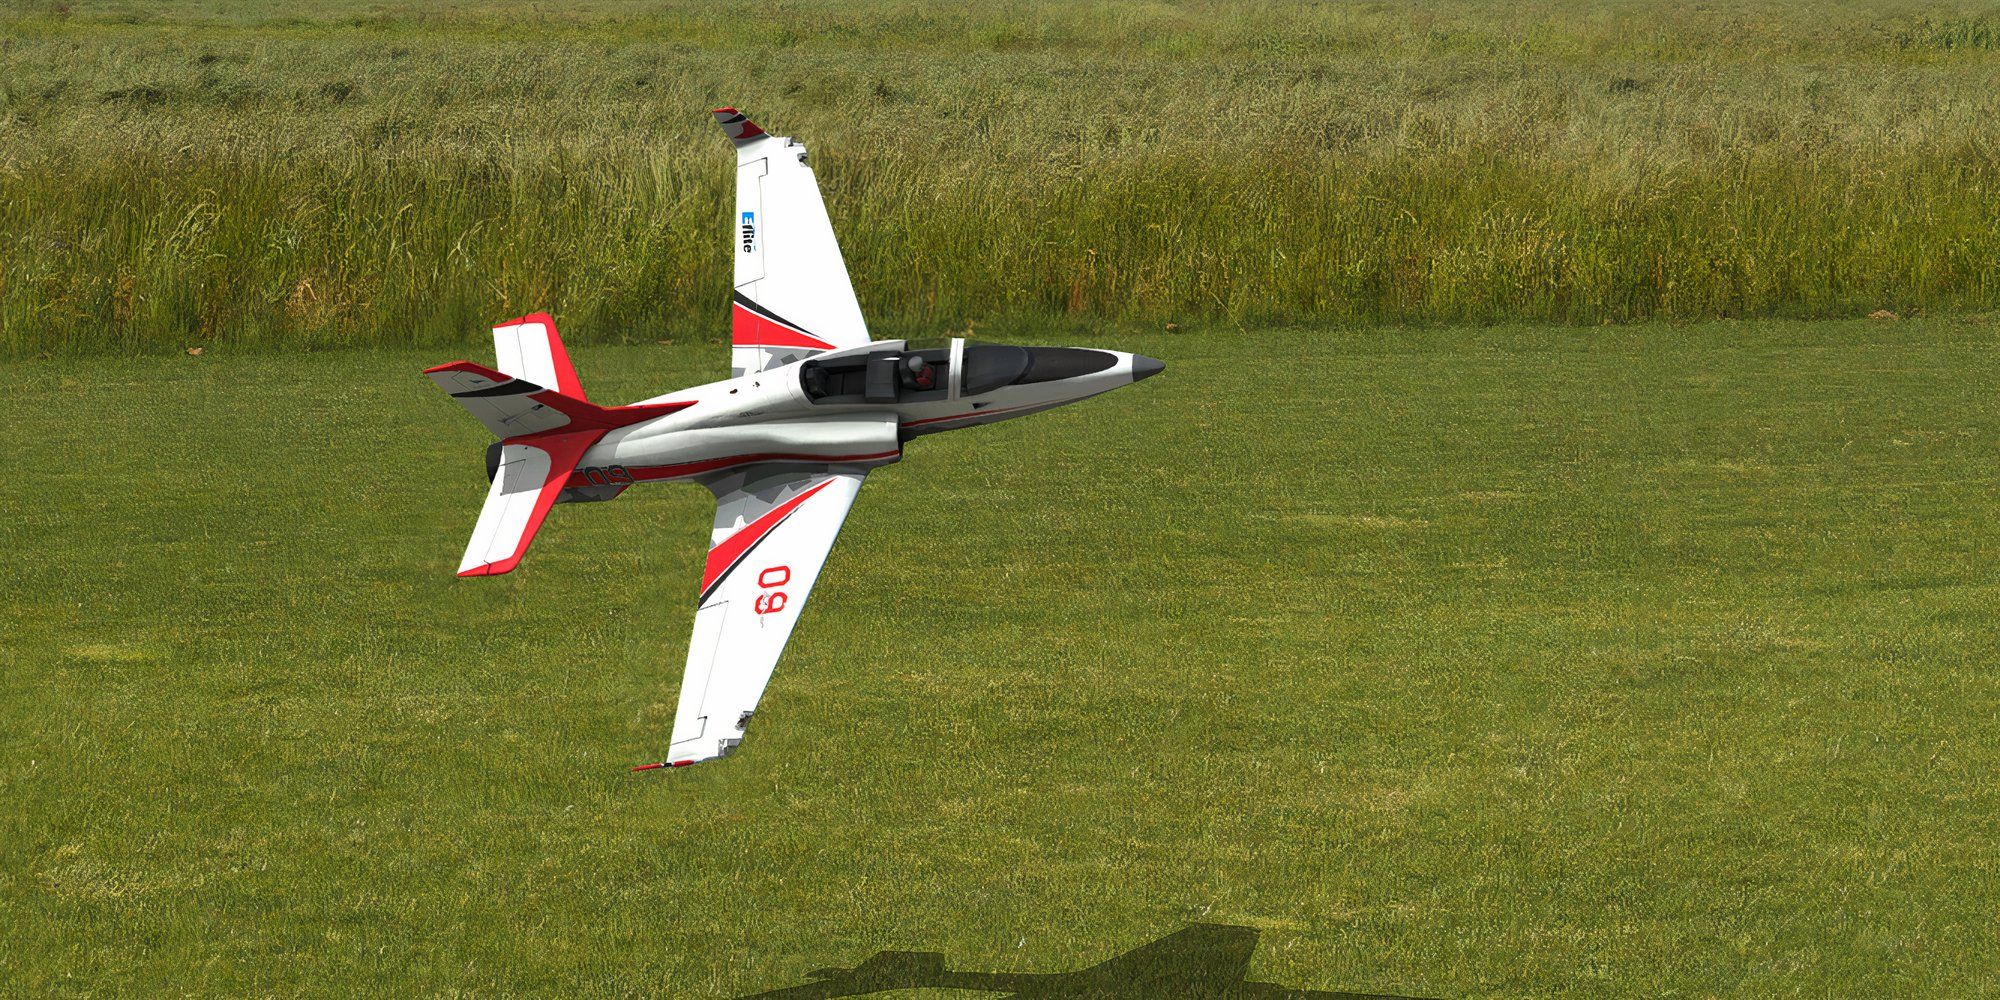 A plane soaring above a field in RealFlight Evolution